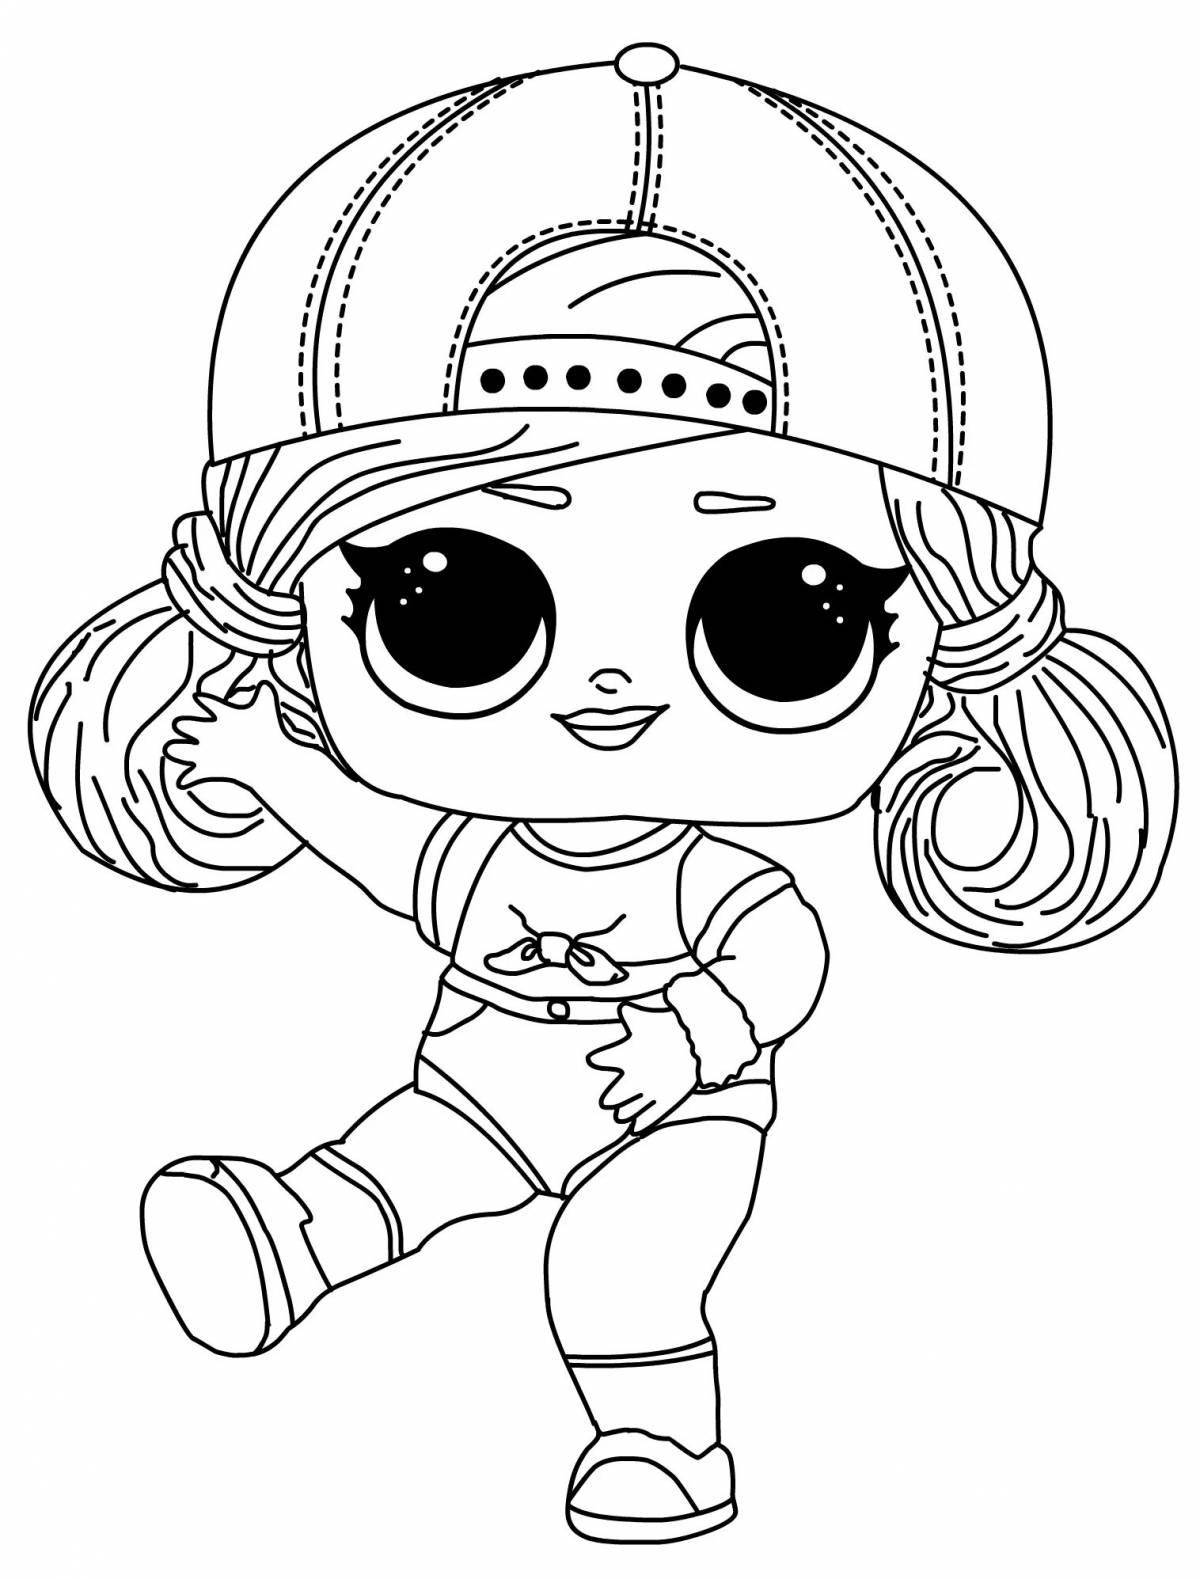 Radiant coloring page turn it on lol